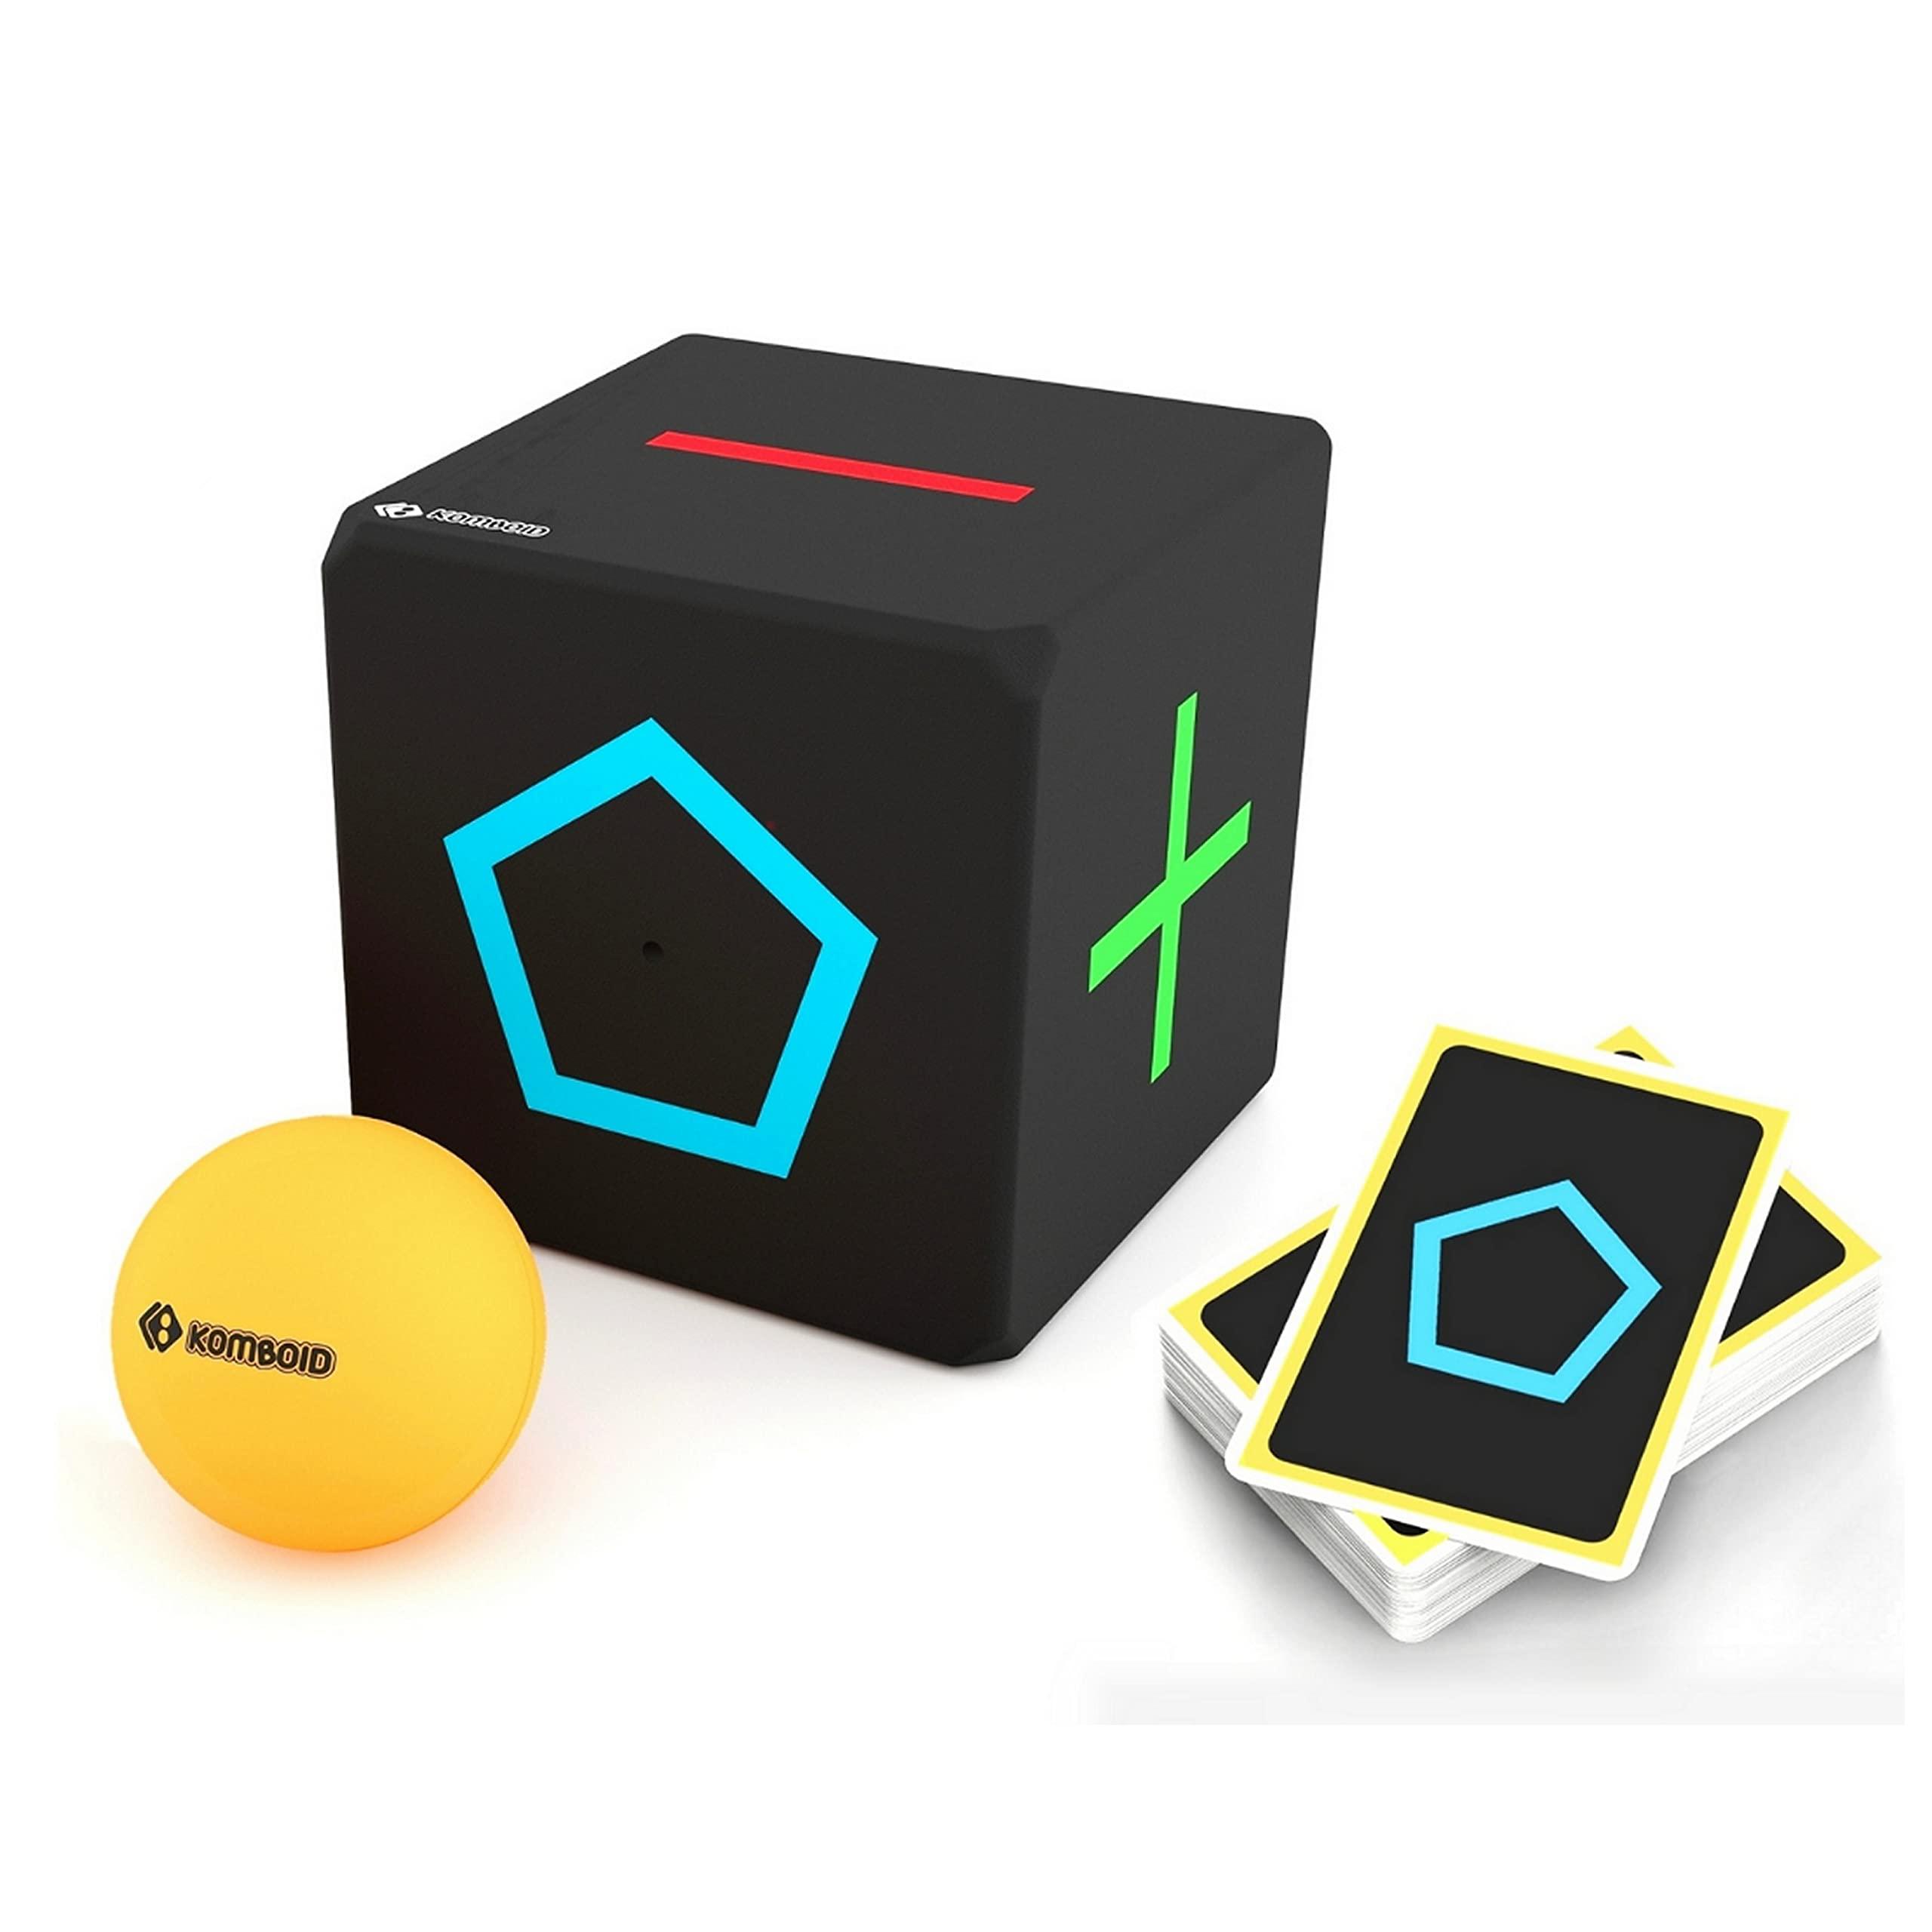 komboid ball bouncing skill game for teenagers and adults. single player or with friends. gift for boy girl from 12 year old 